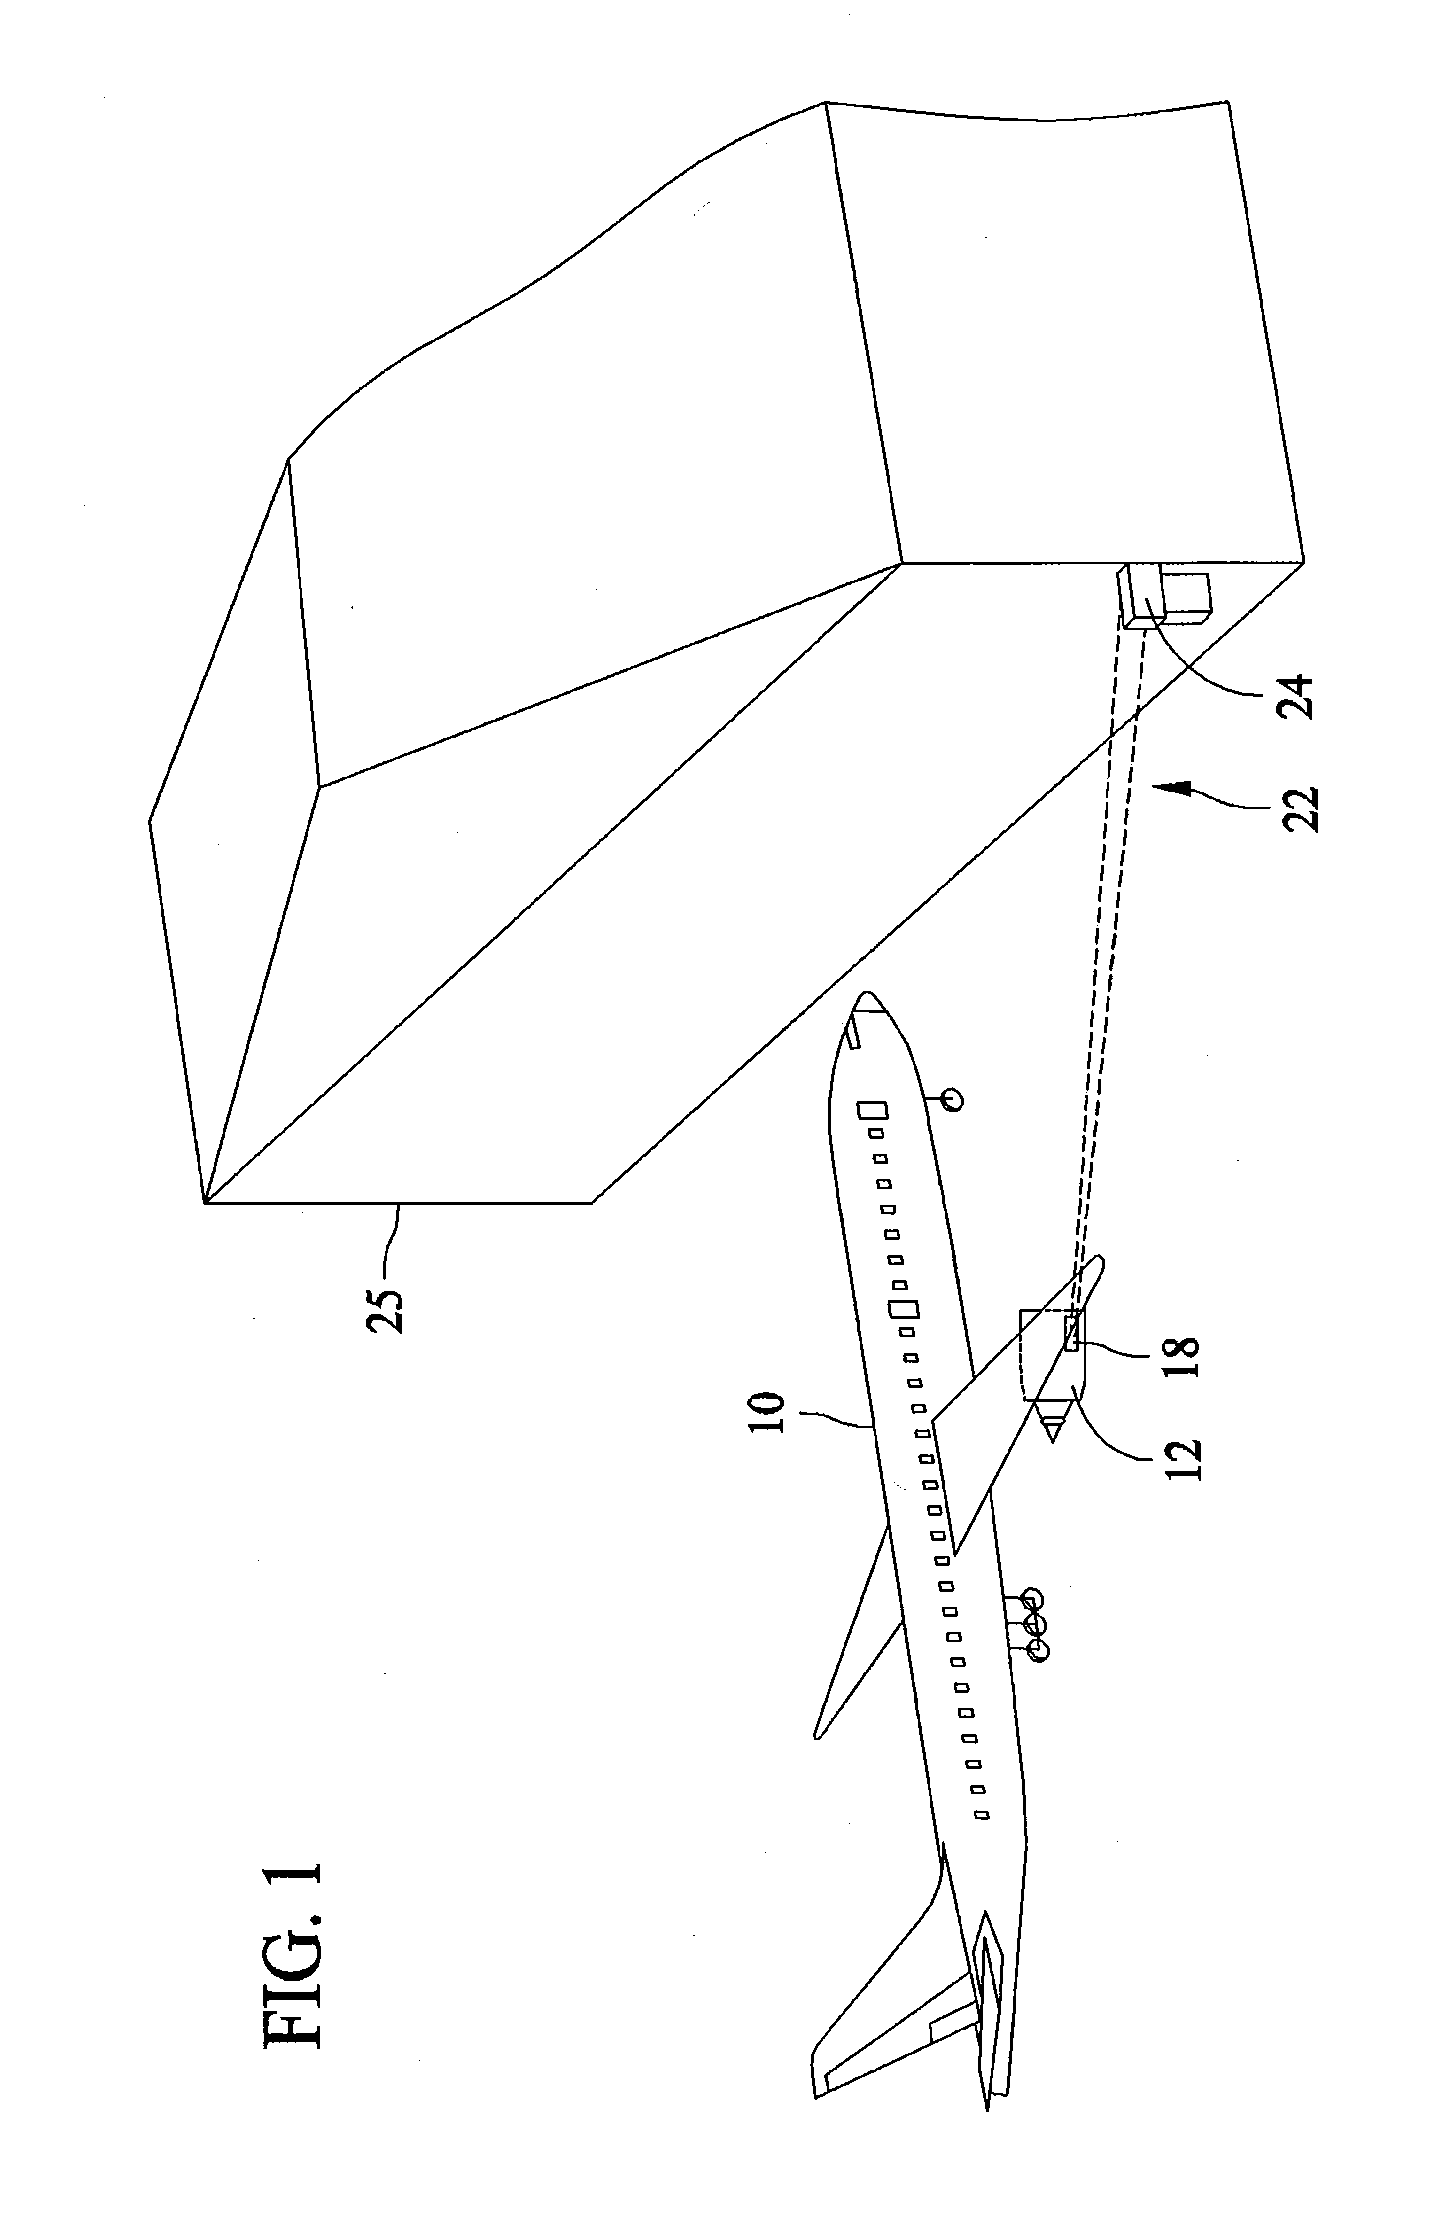 System and methods for tracking aircraft components